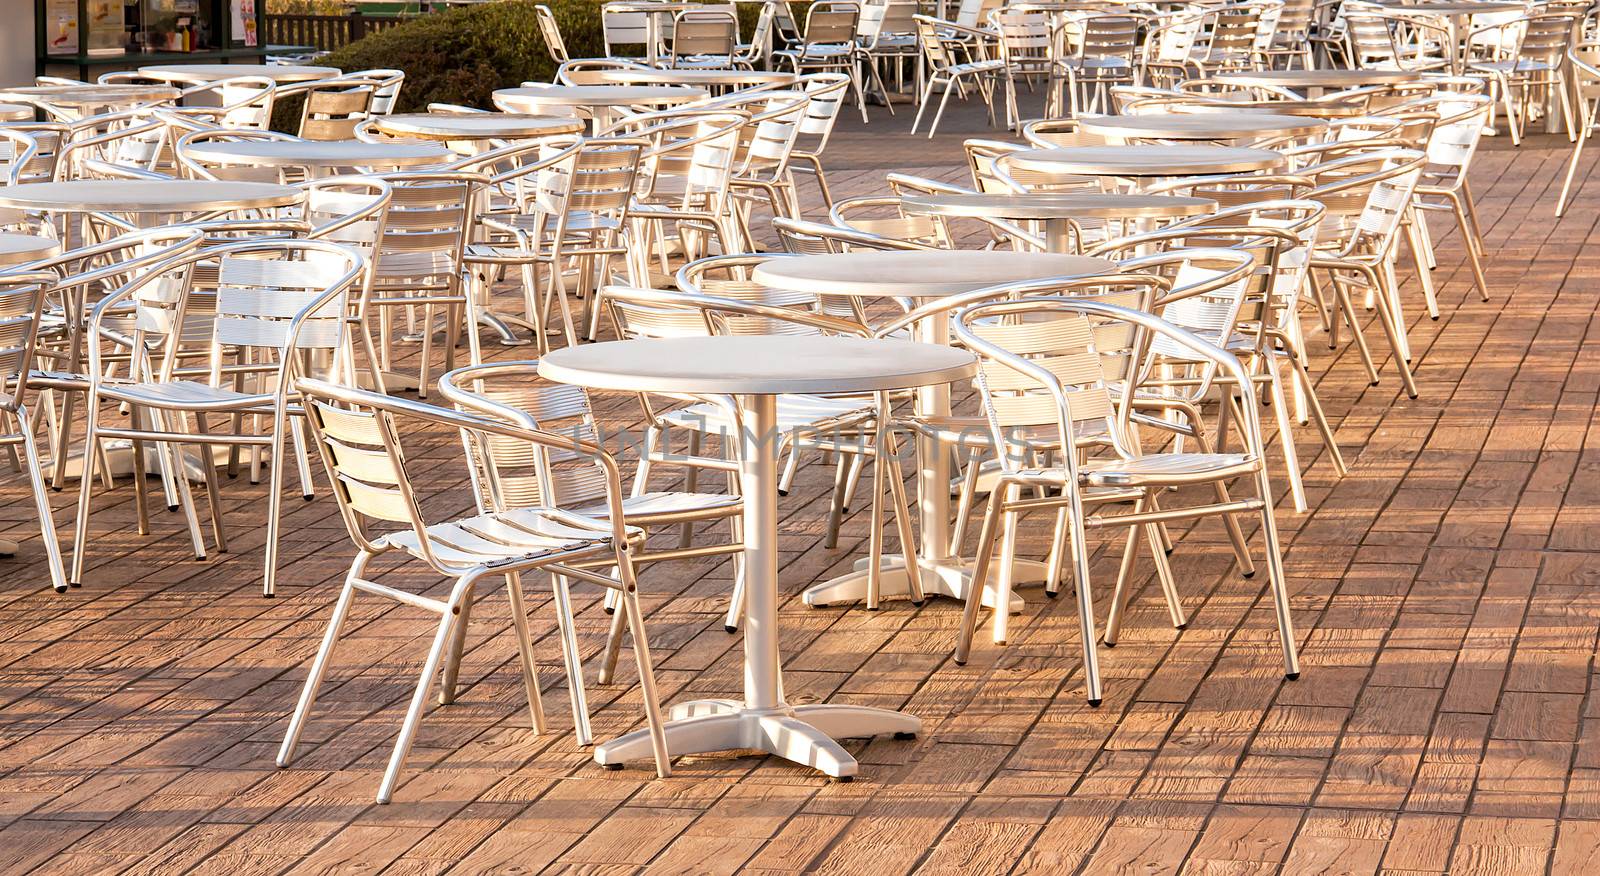 Table and chairs For outdoors restaurants